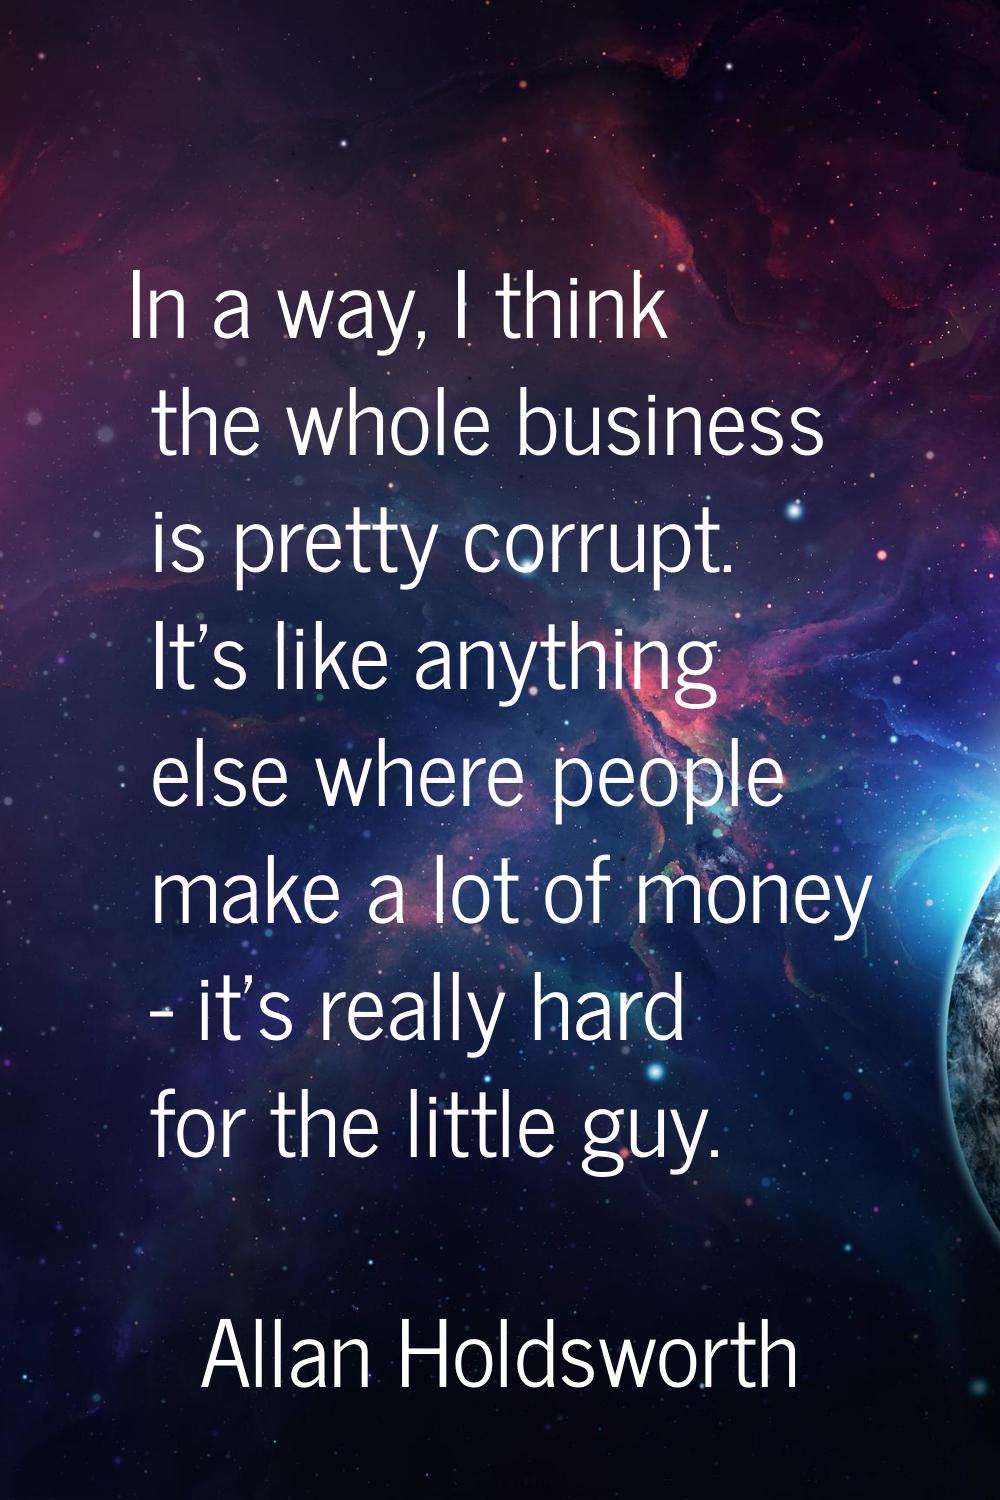 In a way, I think the whole business is pretty corrupt. It's like anything else where people make a